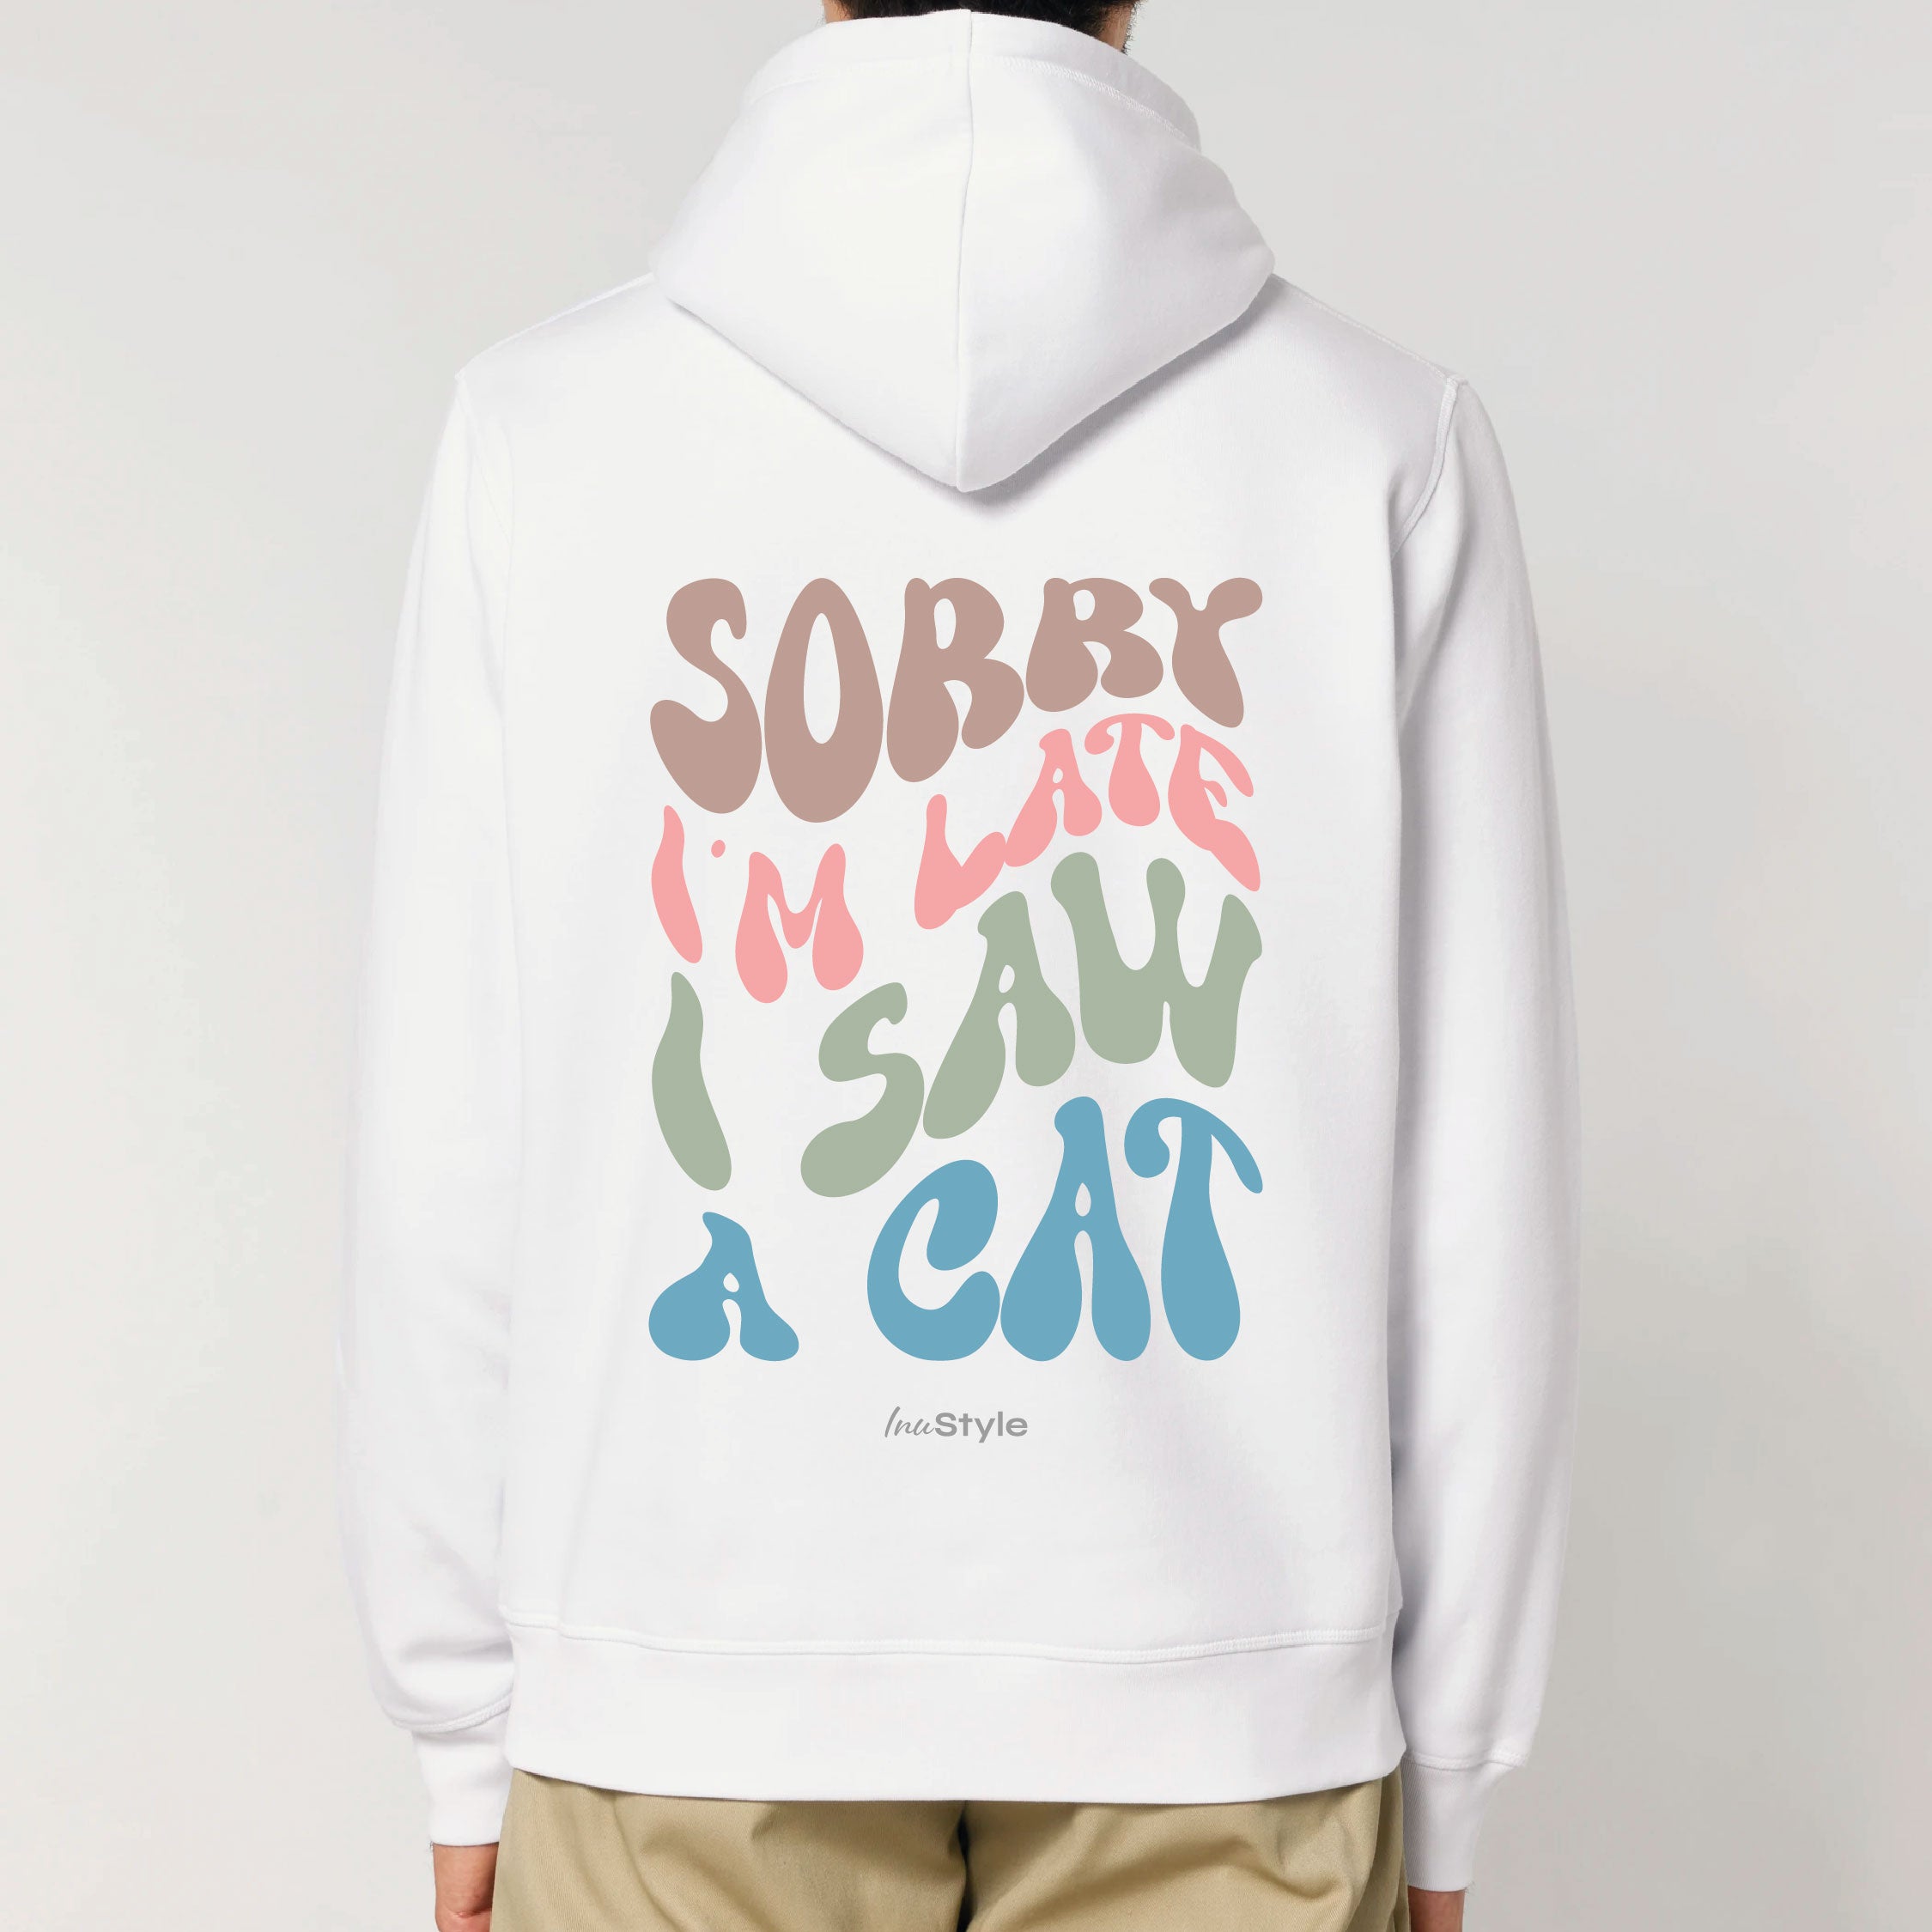 New Inu.style Collection - Sorry I am late. I saw a CAT - Hoodie